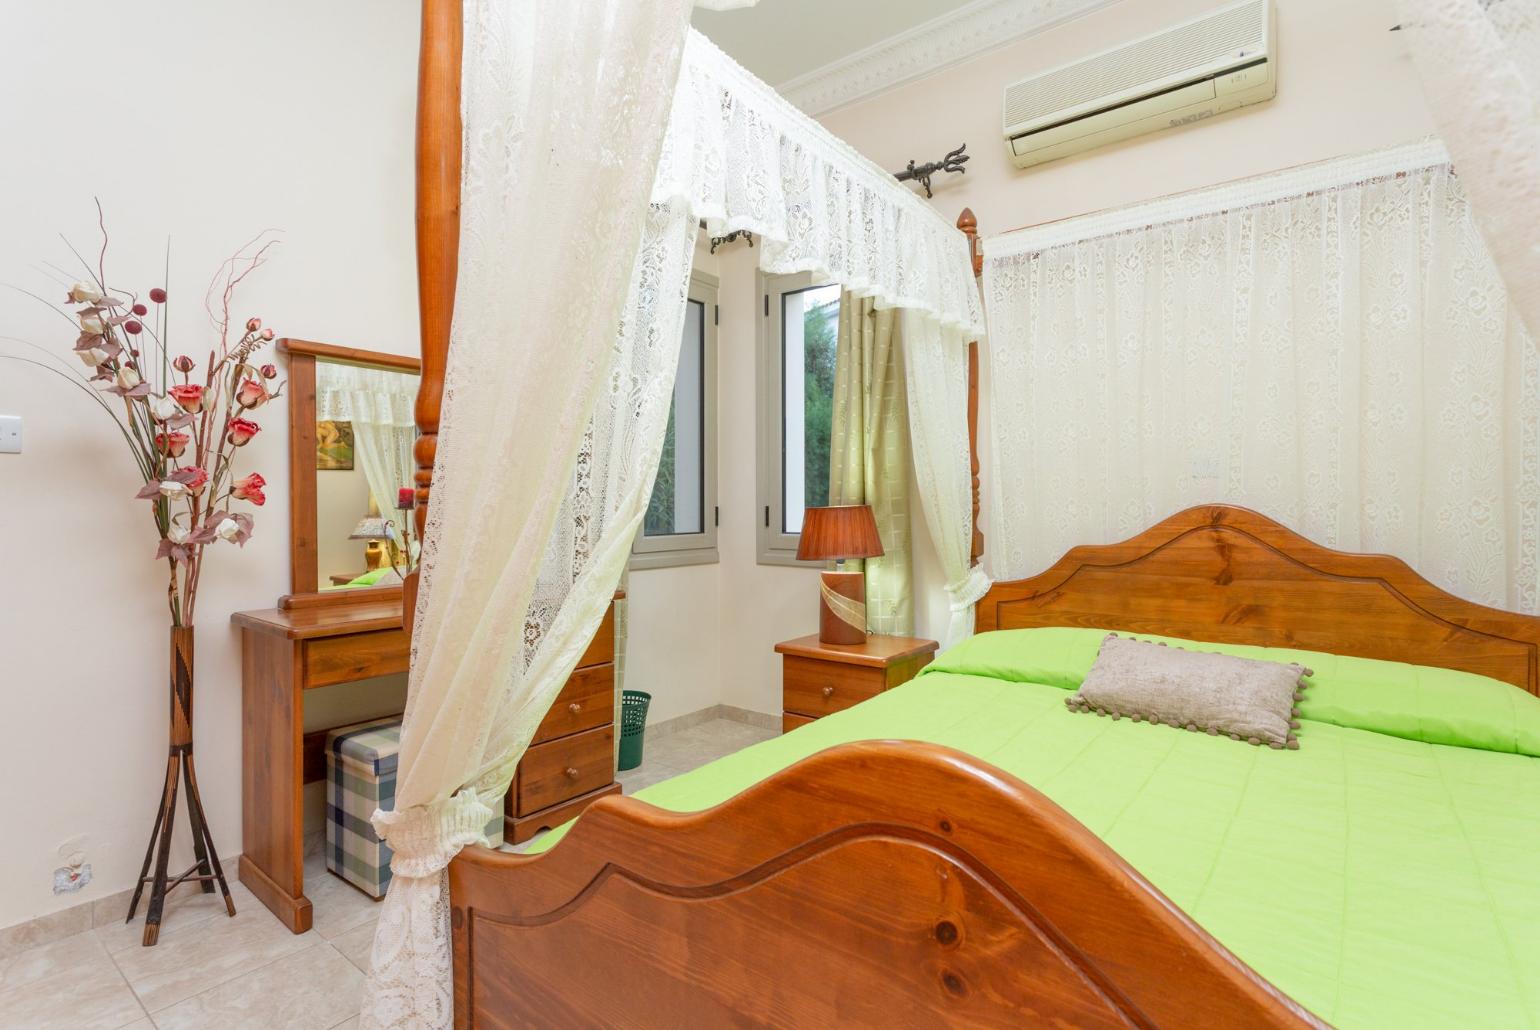 Double bedroom with A/C and pool terrace access